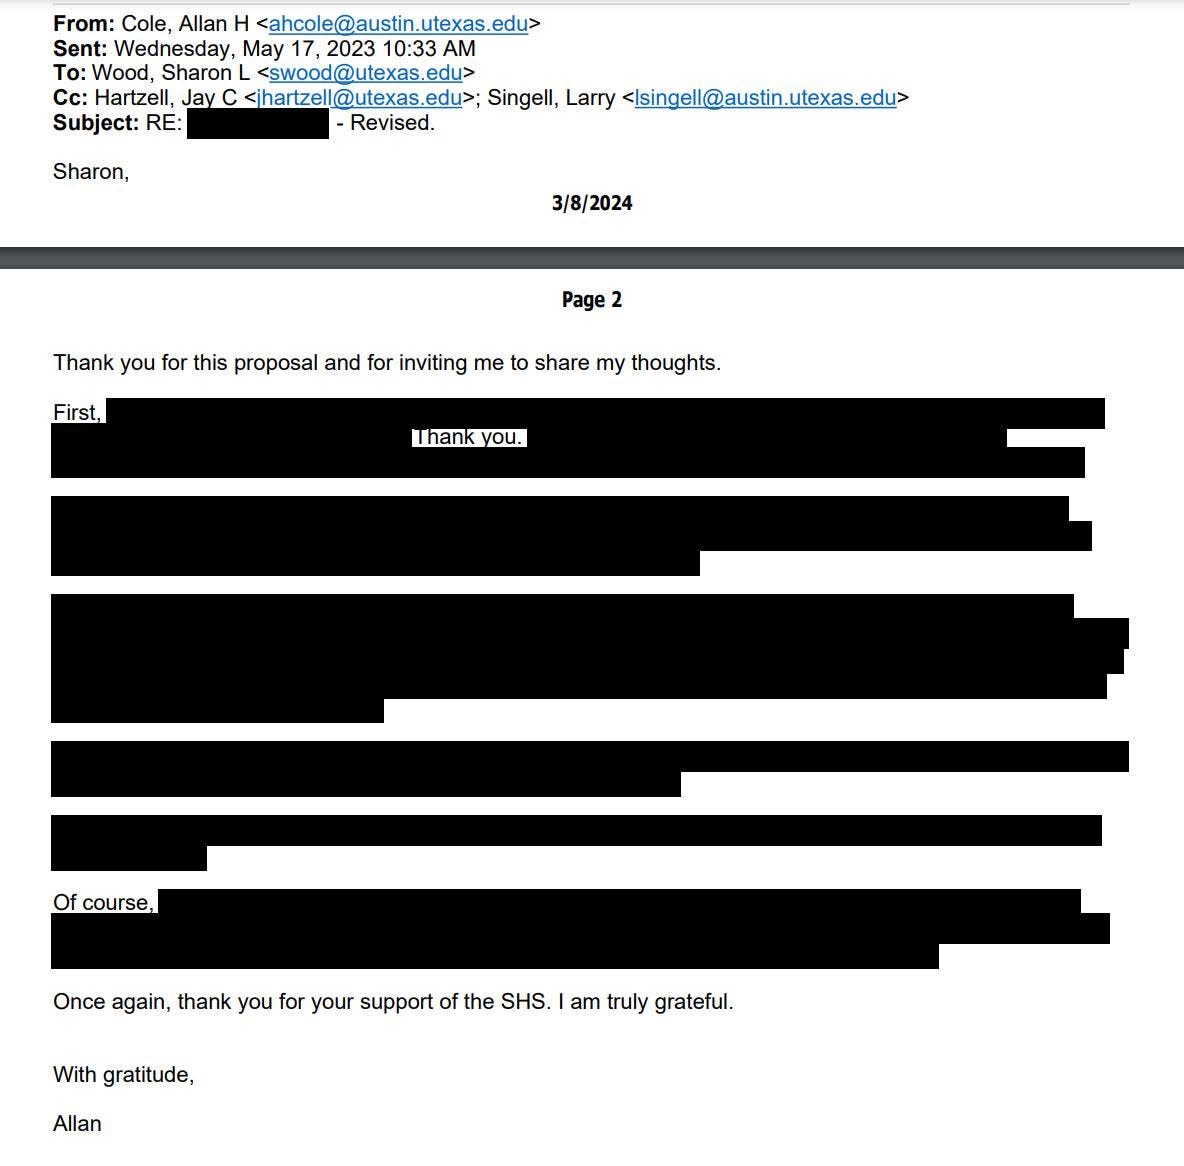 In response to an American-Statesman public records request for communications about the University of Texas athletic department's plans to provide financial support to the School of Social Work, UT provided heavily redacted emails like this one from School of Social Work Dean Allan Cole to UT Executive Vice President and Provost Sharon Wood.